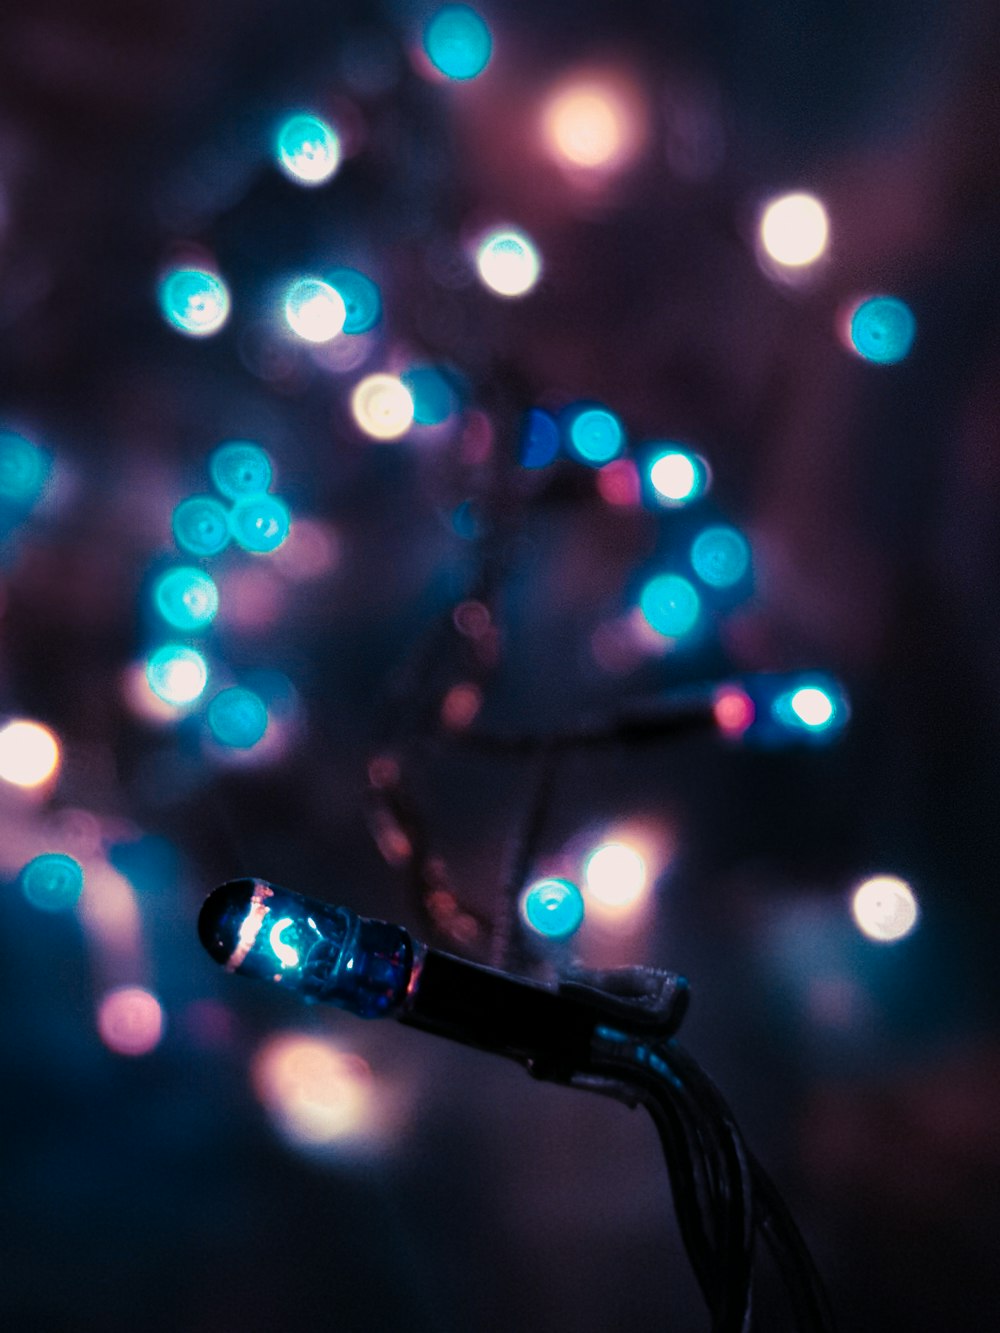 black microphone with lights in bokeh photography